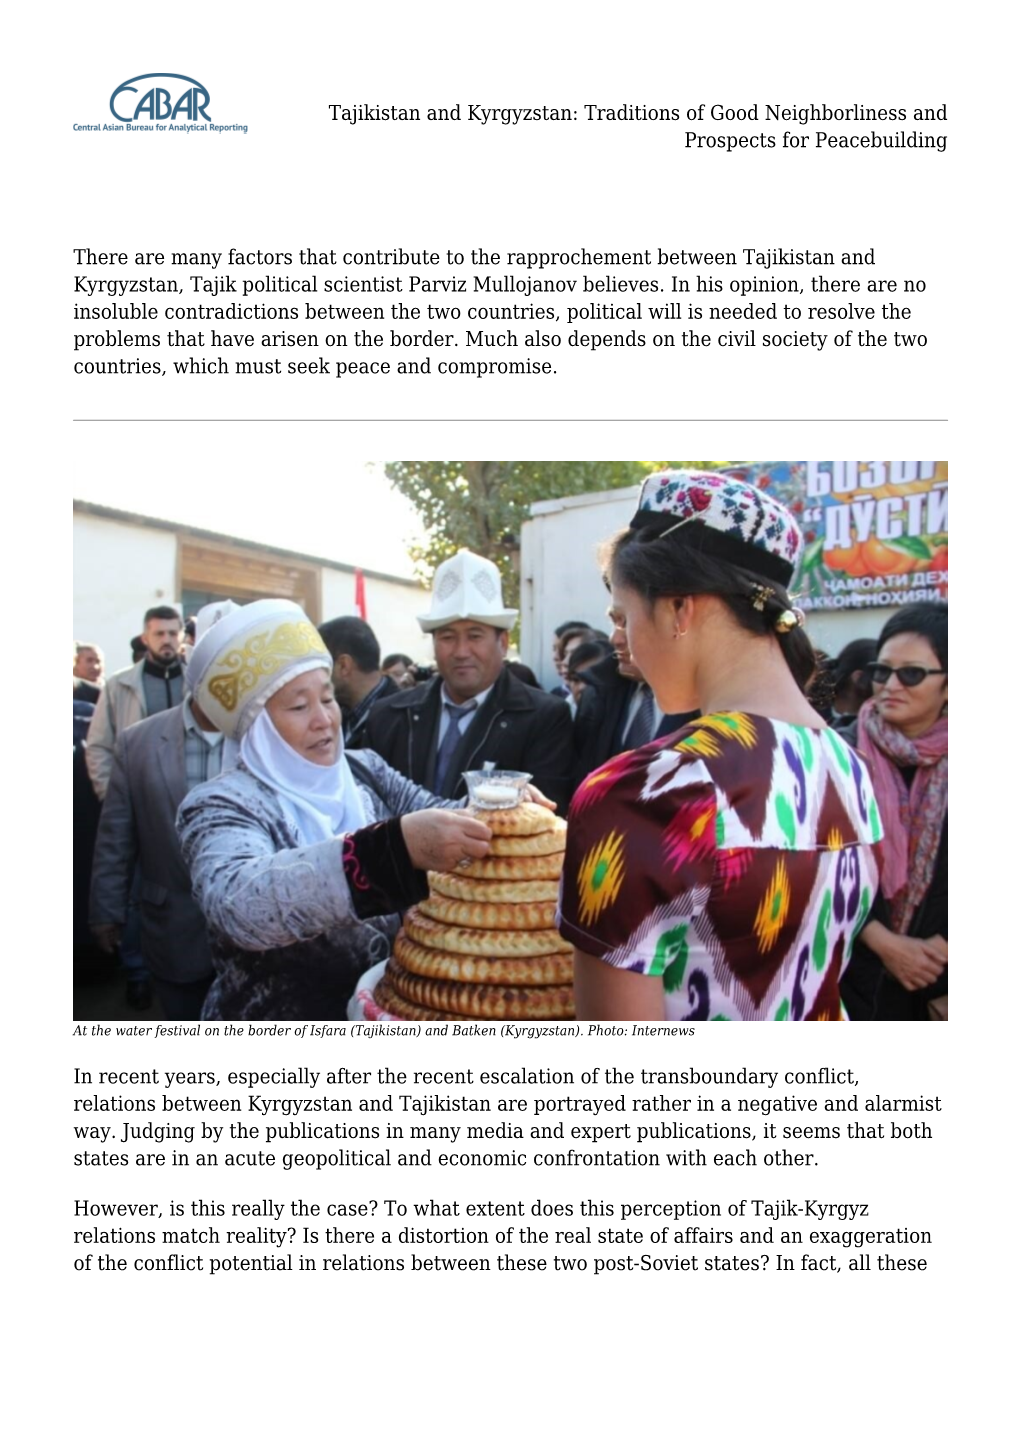 Tajikistan and Kyrgyzstan: Traditions of Good Neighborliness and Prospects for Peacebuilding